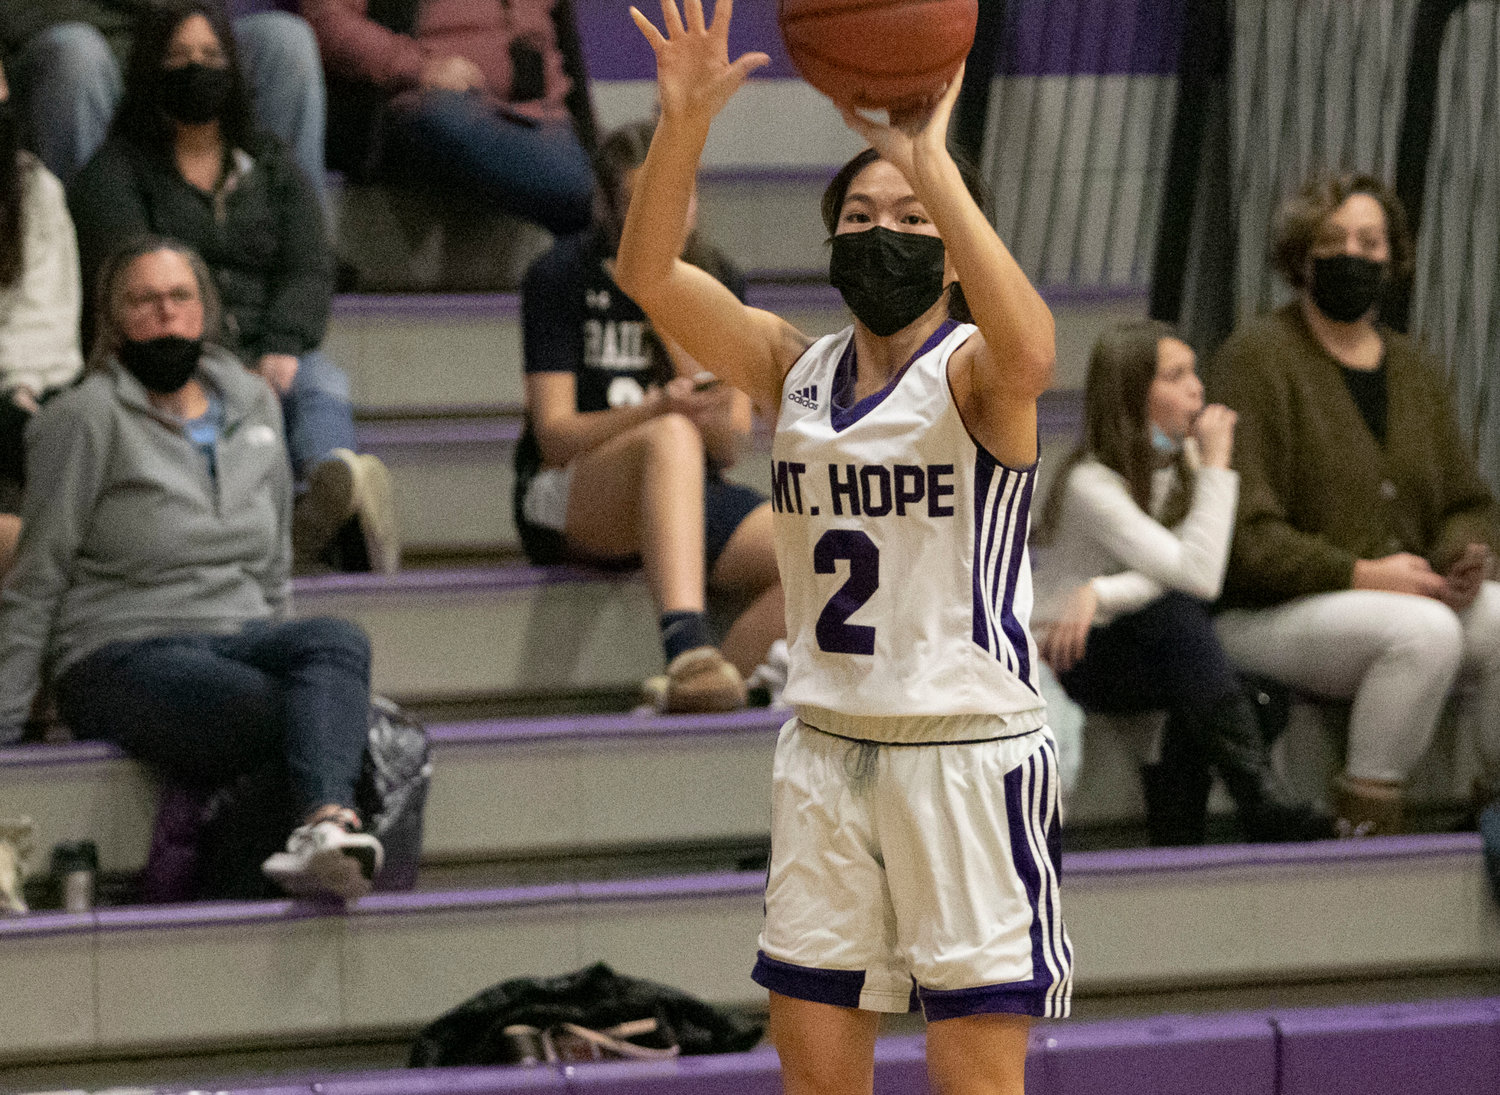 Elsa White sinks a three pointer during the Somerset Berkley game. The guard led the Huskies in scoring with 14 points.